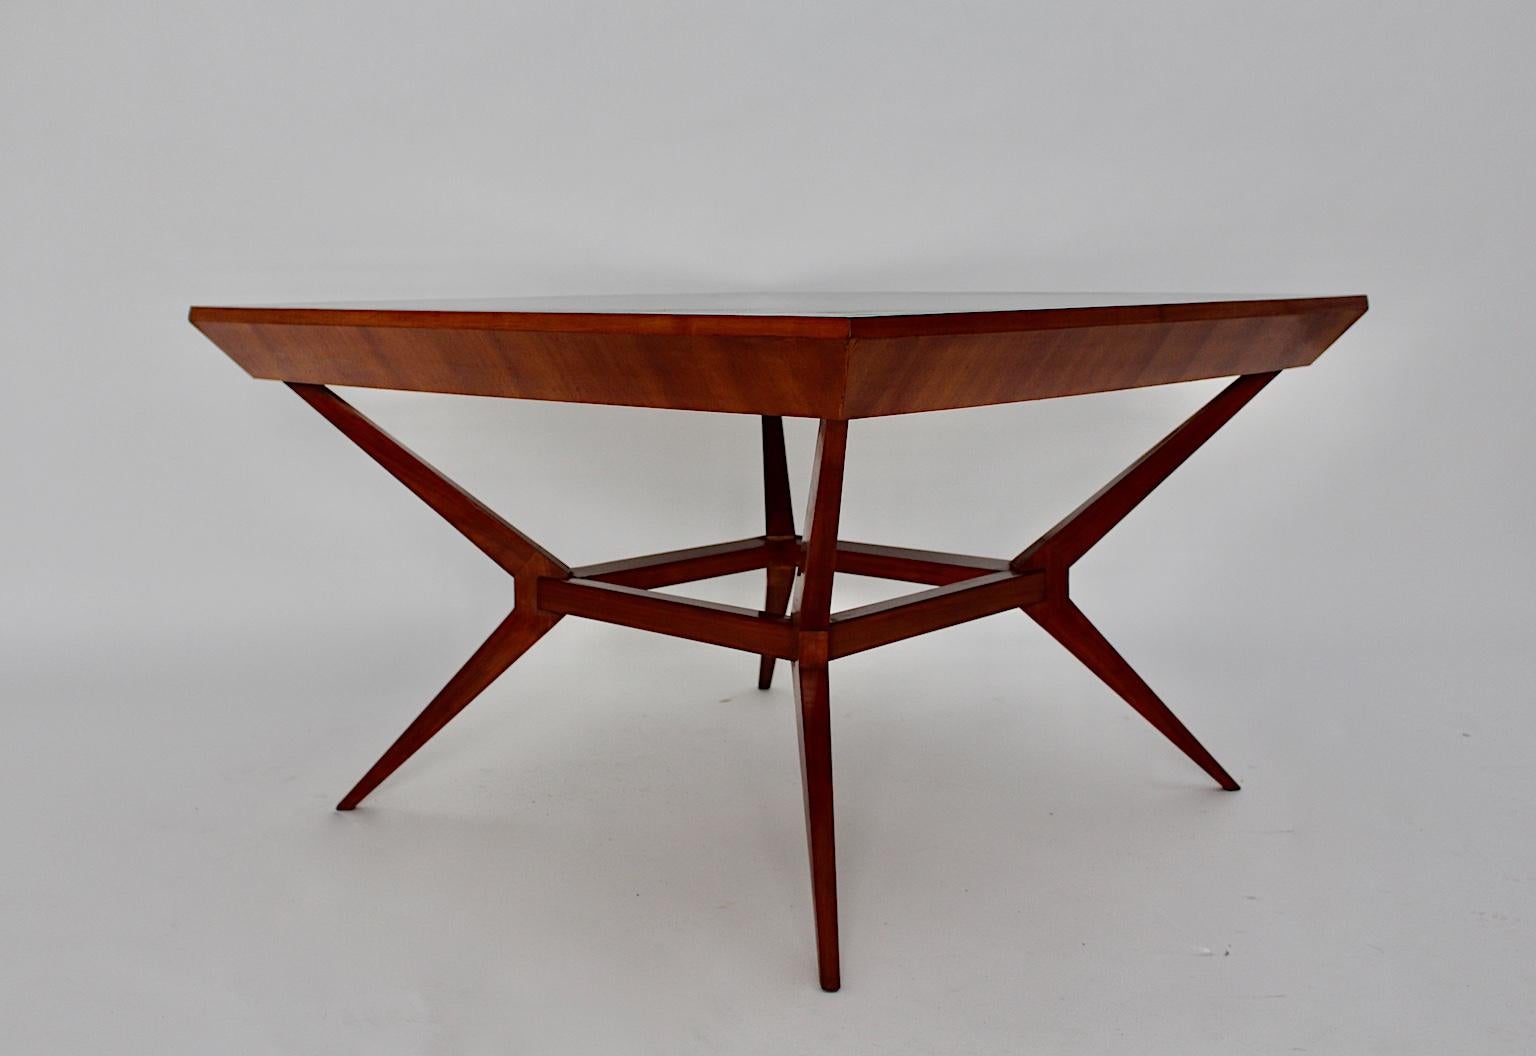 Mid-Century Modern vintage cherrywood dining table or center table from cherrywood and teal green formica plate design attributed to Franz Schuster Vienna, 1950s.
An outstanding dining table, which was designed and manufactured in the heart of